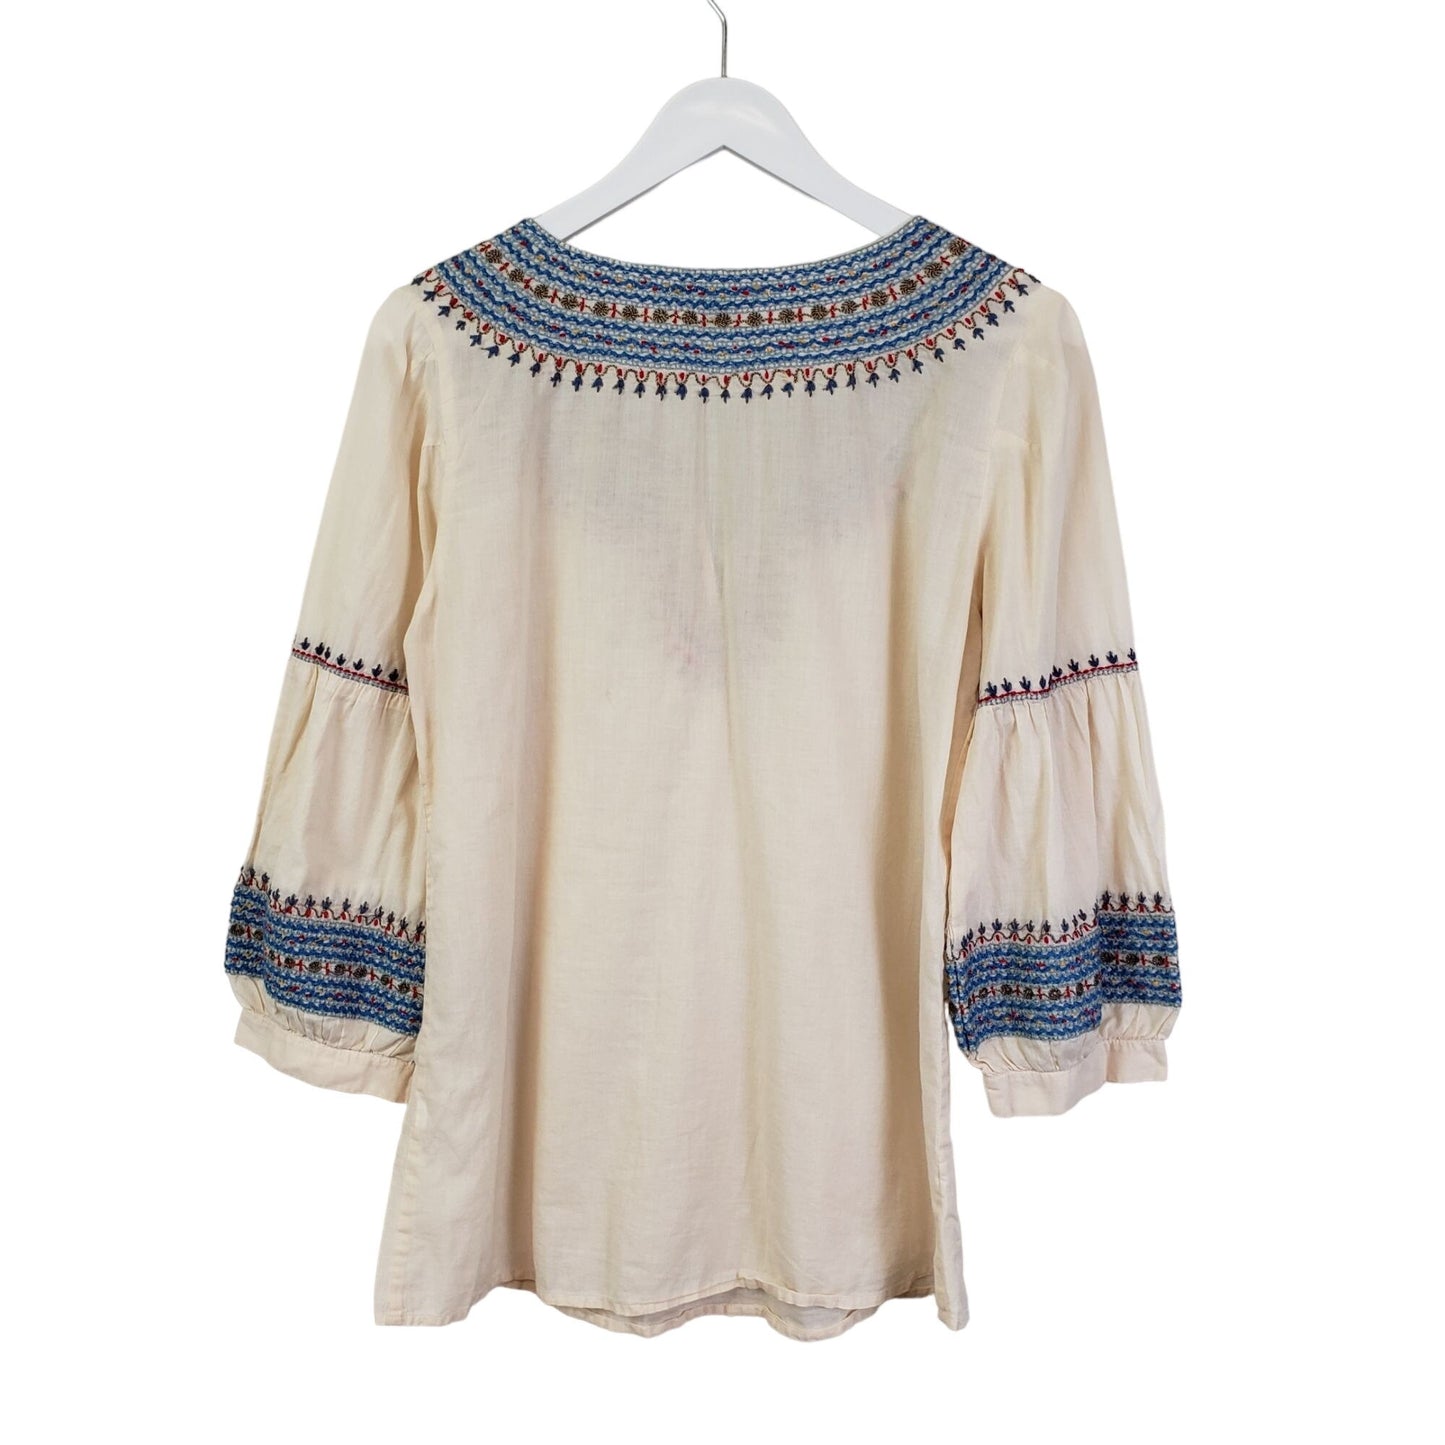 Lucky Brand Embroidered Boho Peasant Top Size Medium